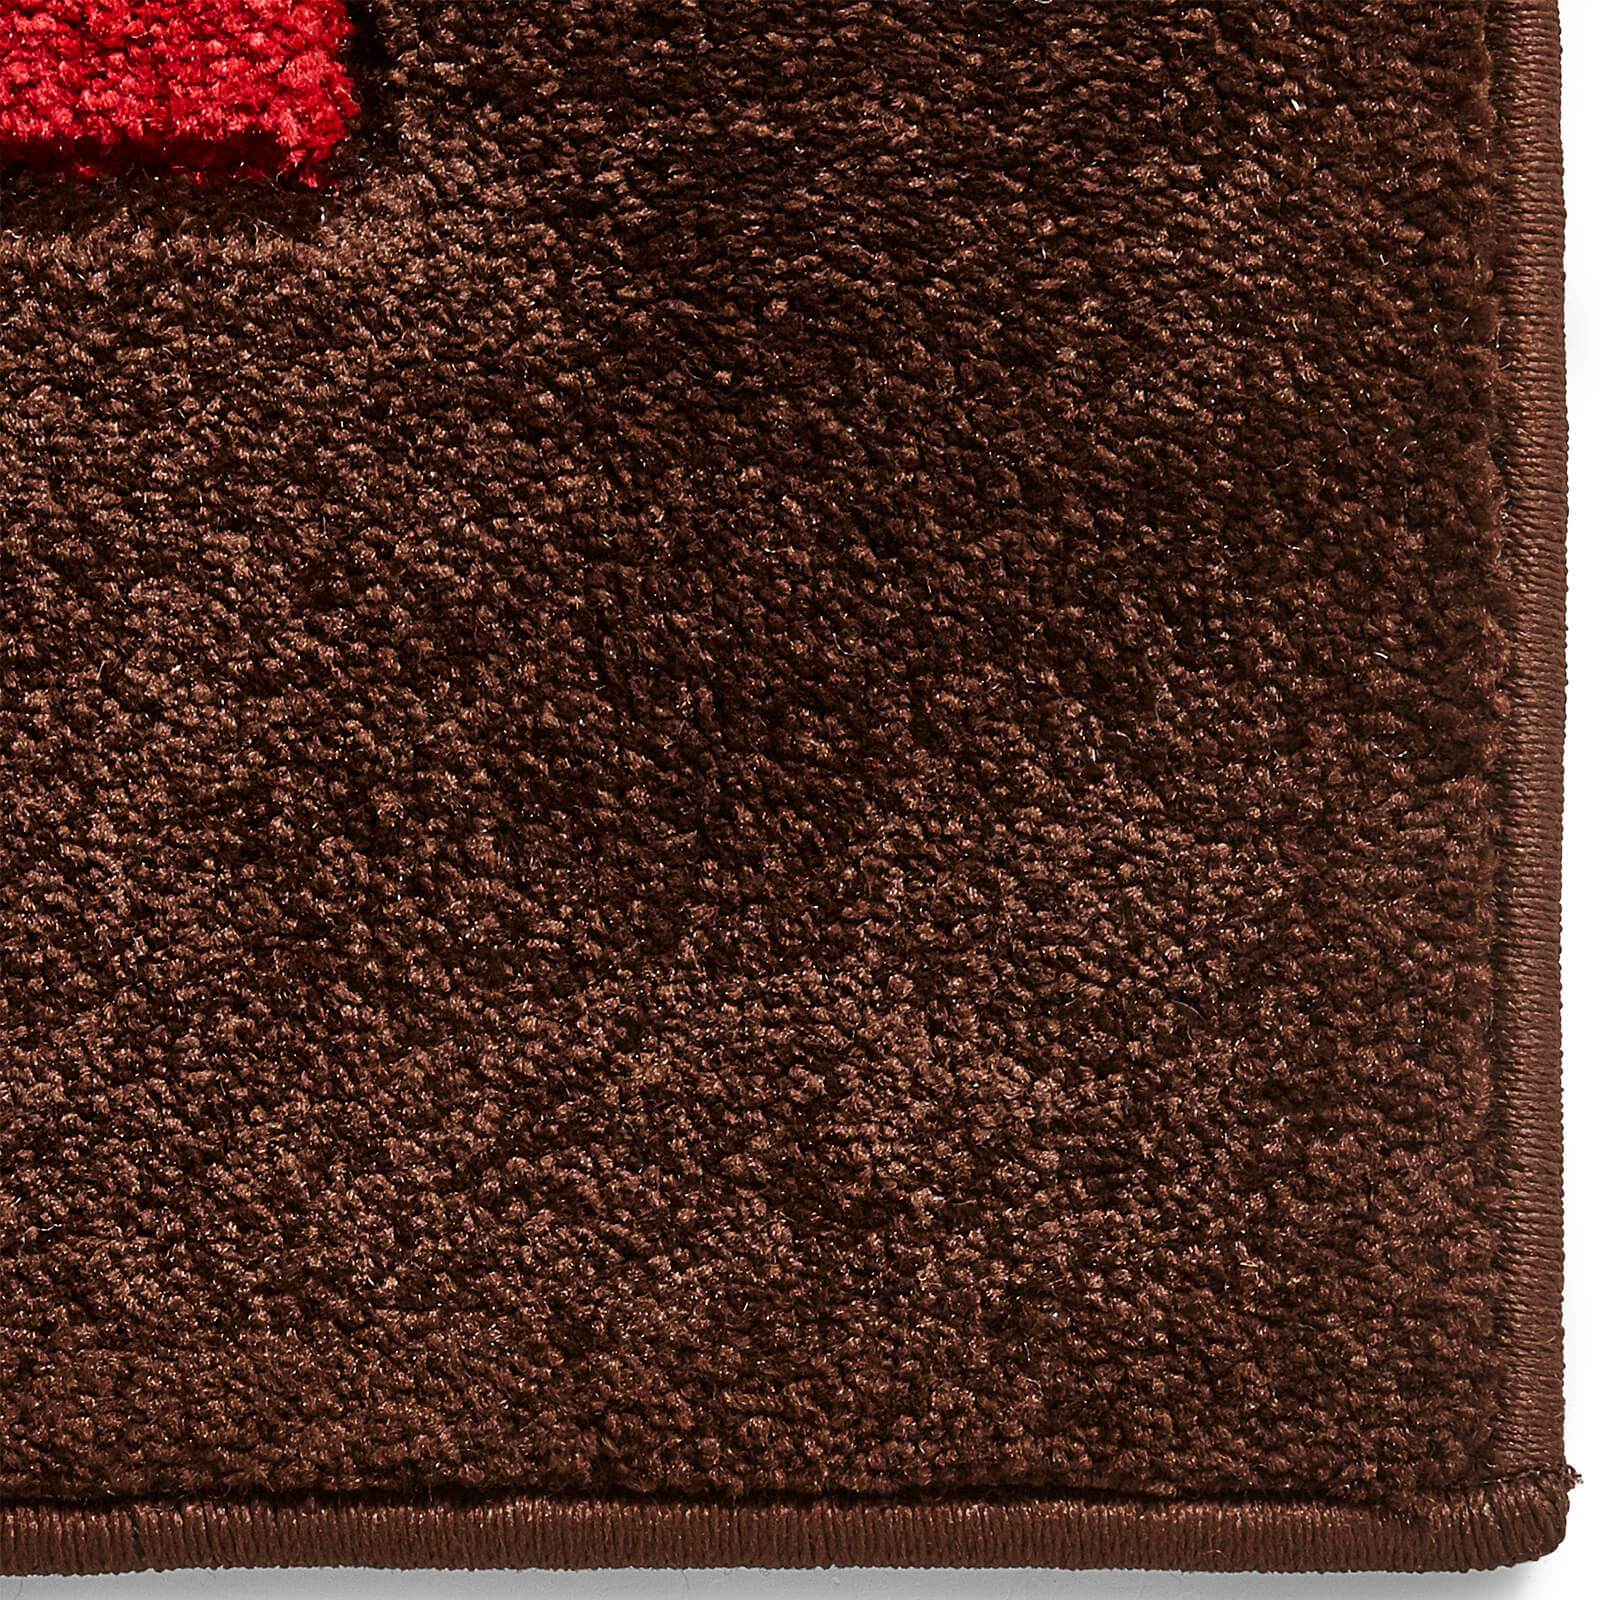 Think Rugs Matrix MT04 Brown / Red Rug